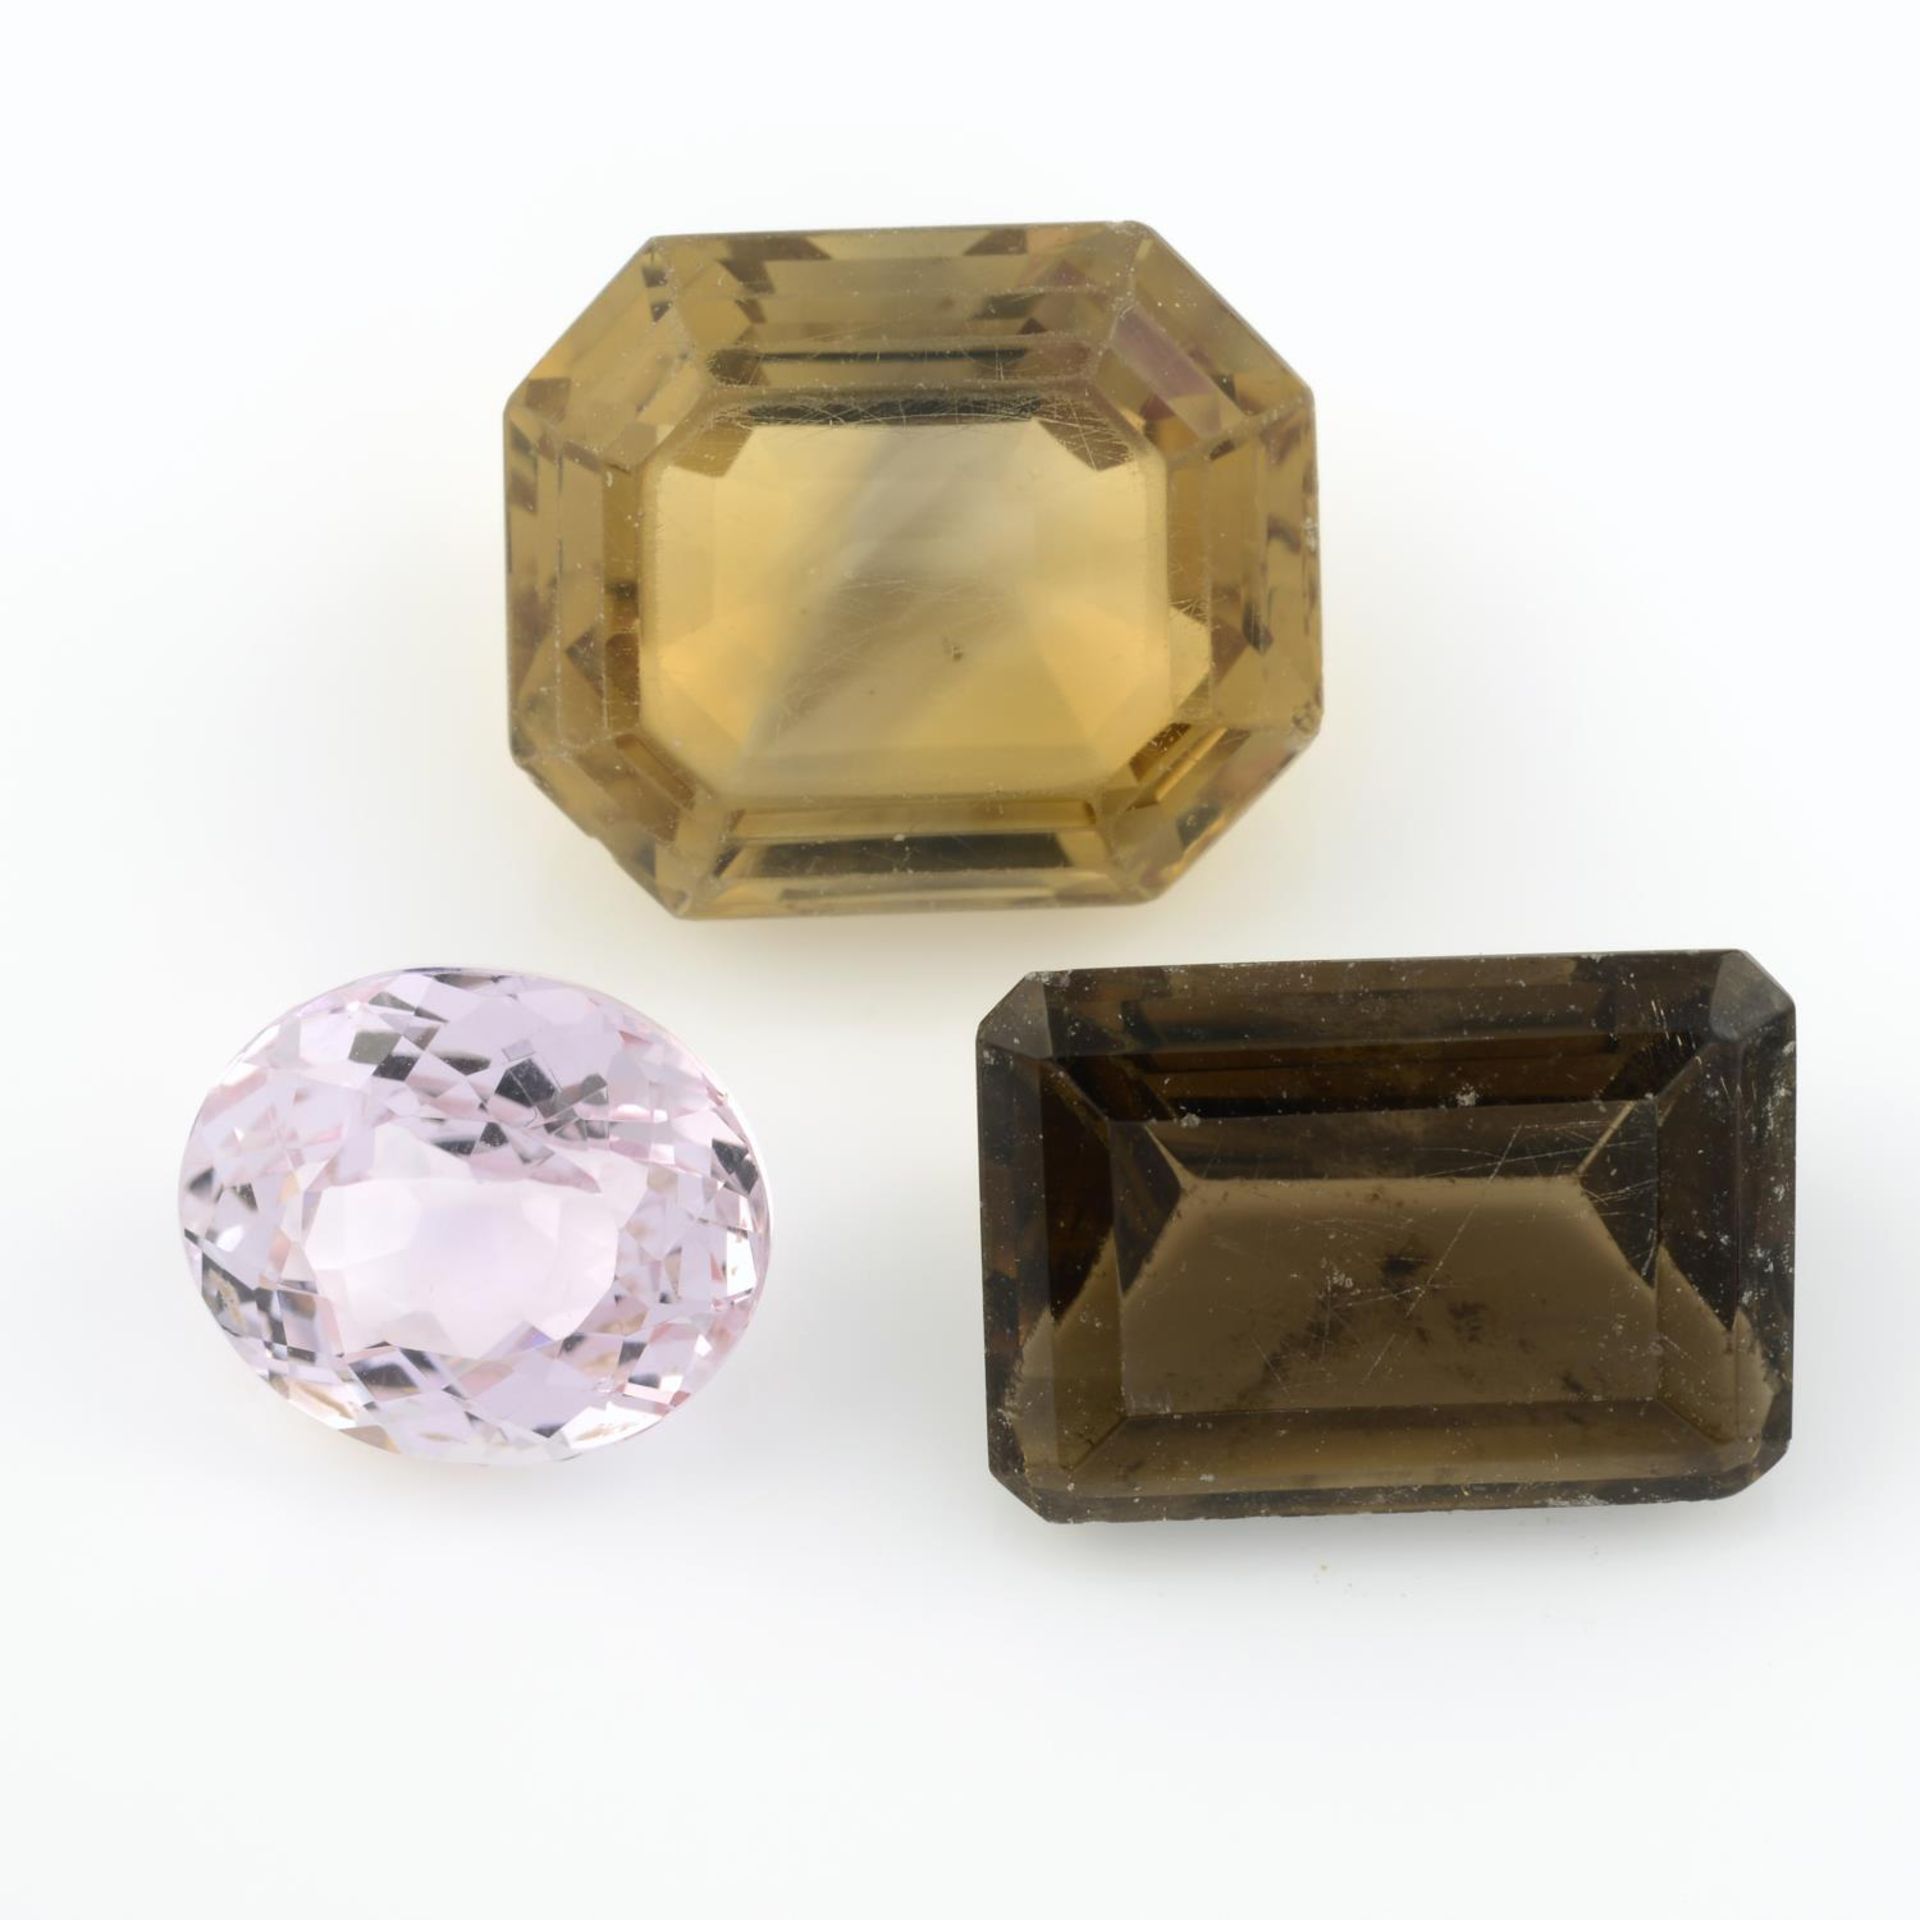 A selection of gemstones, to include predominantly smoky quartz, weighing 307gms.